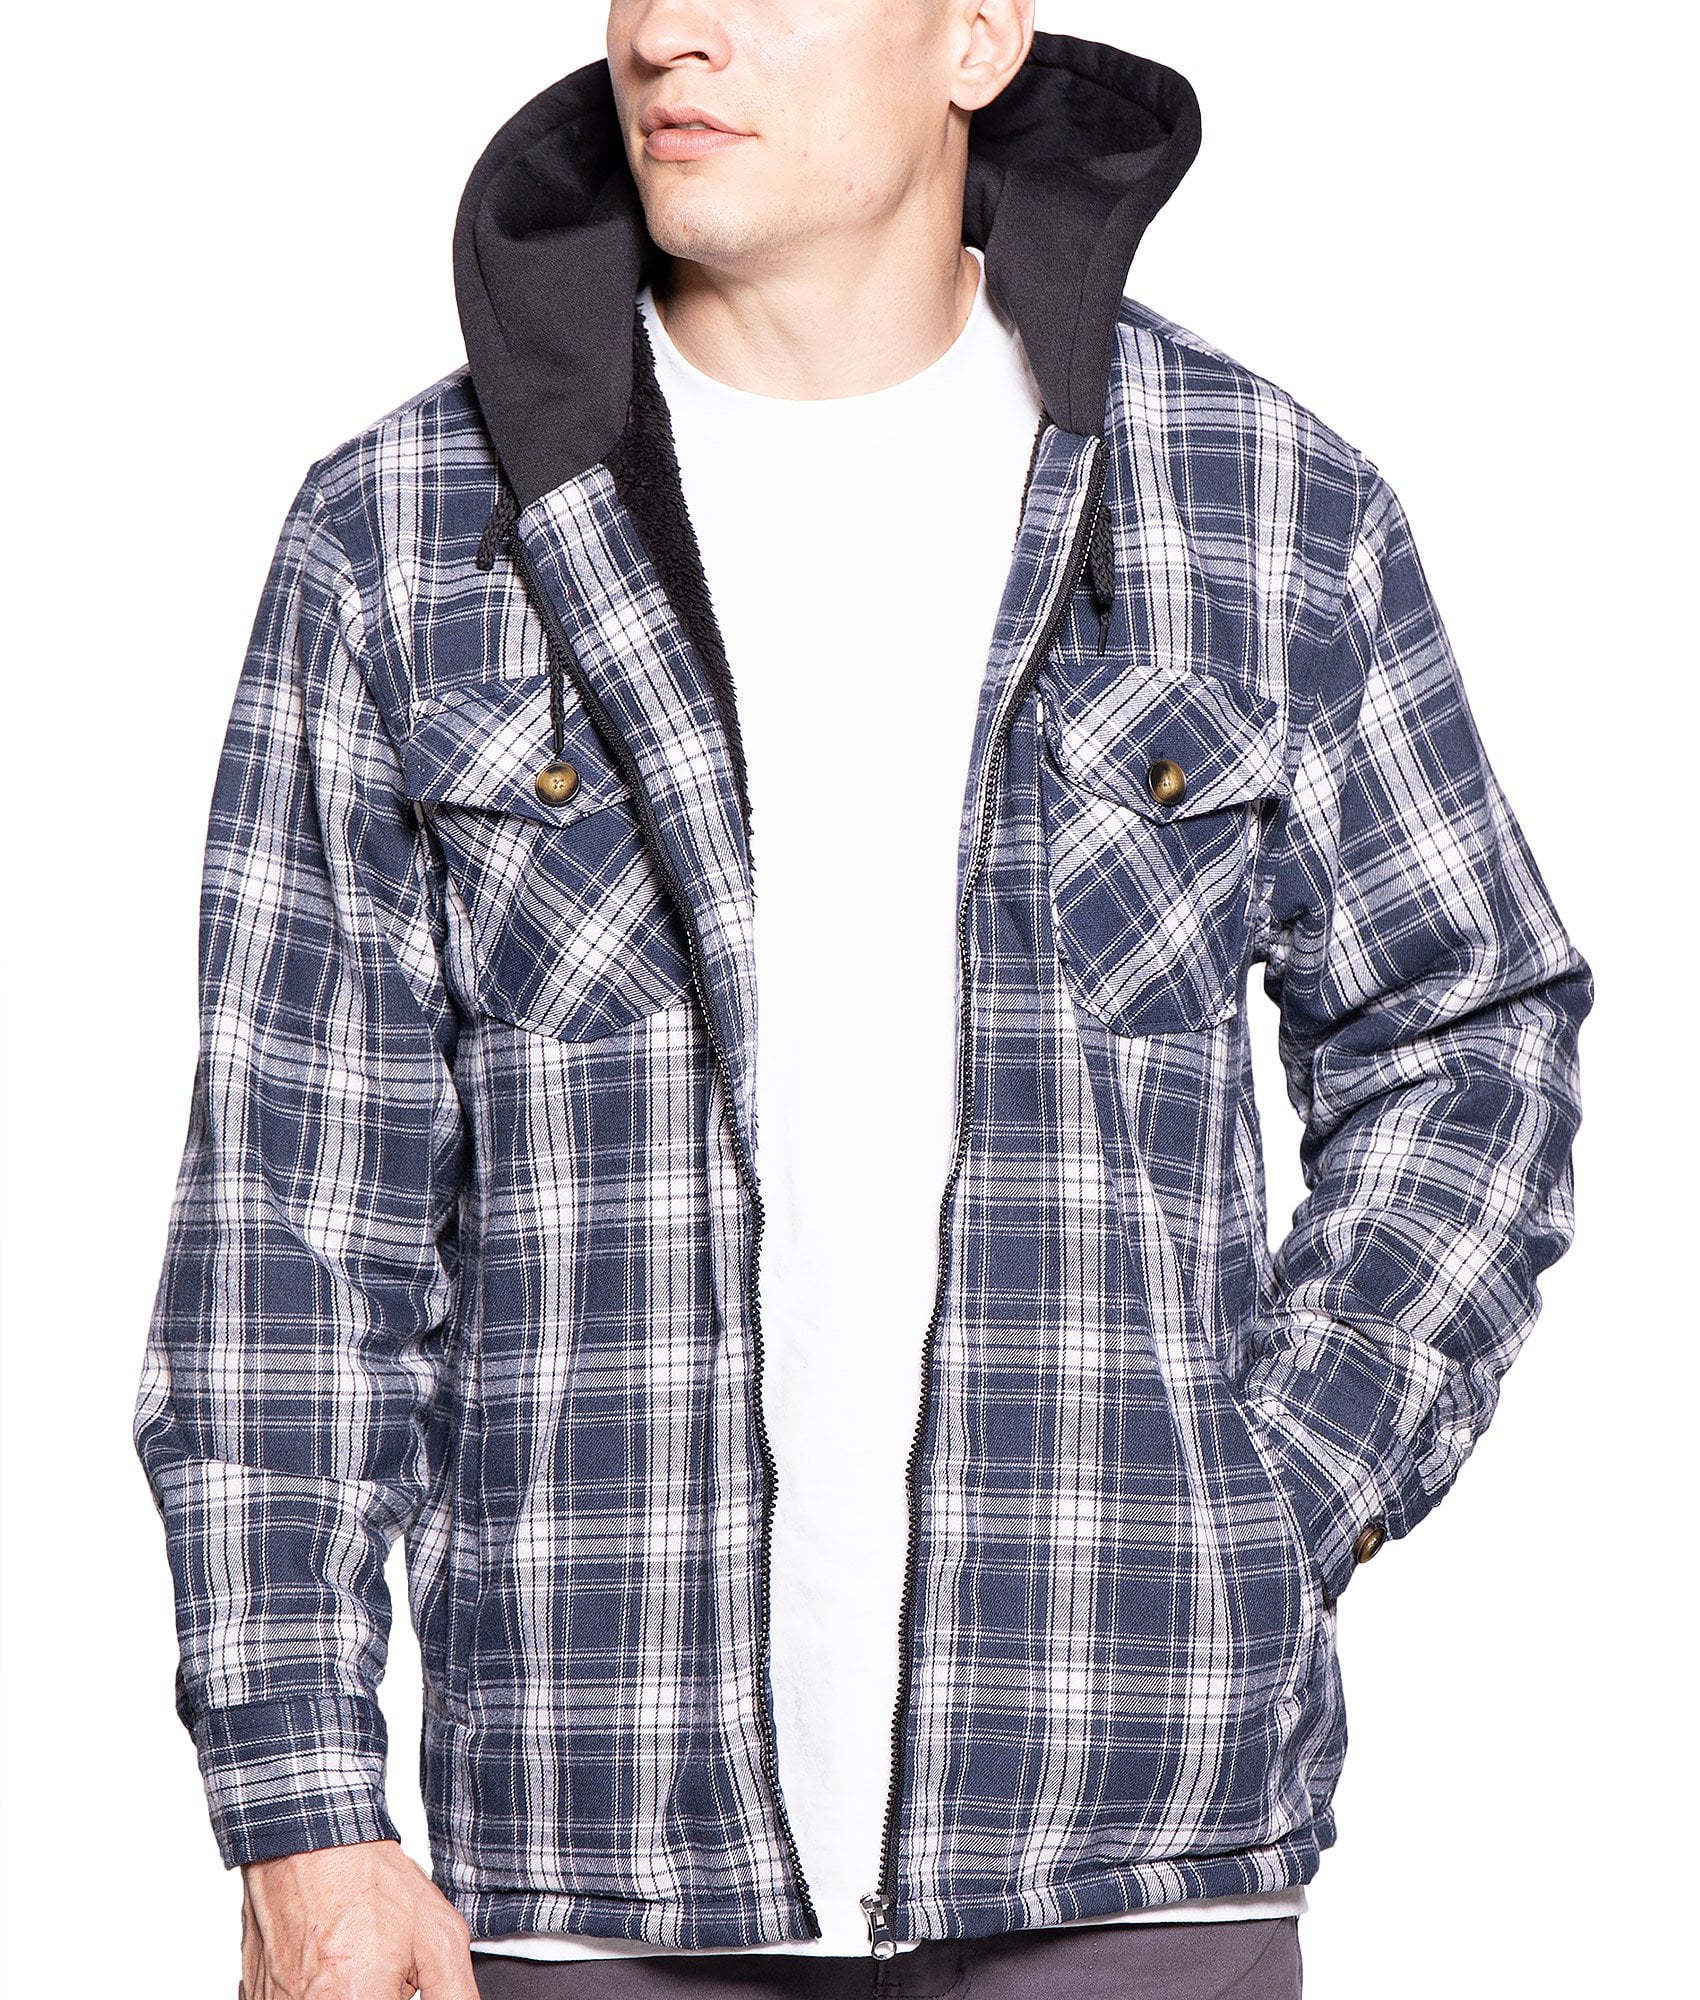 Visive Flannel Shirt Jacket For Men and Big Mens Sherpa Lined Zip Up ...